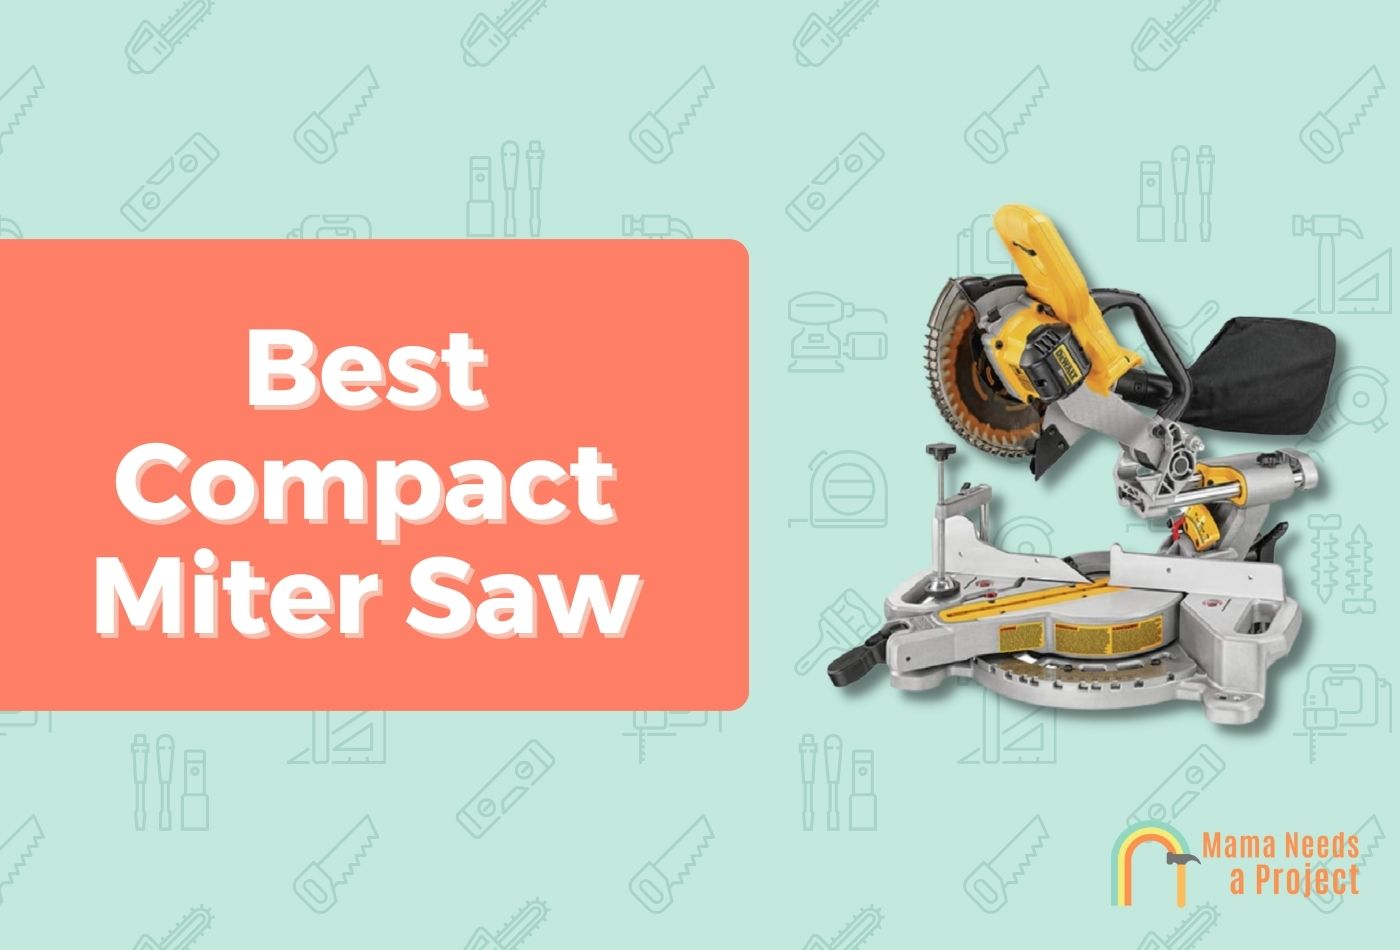 Best Compact Miter Saw